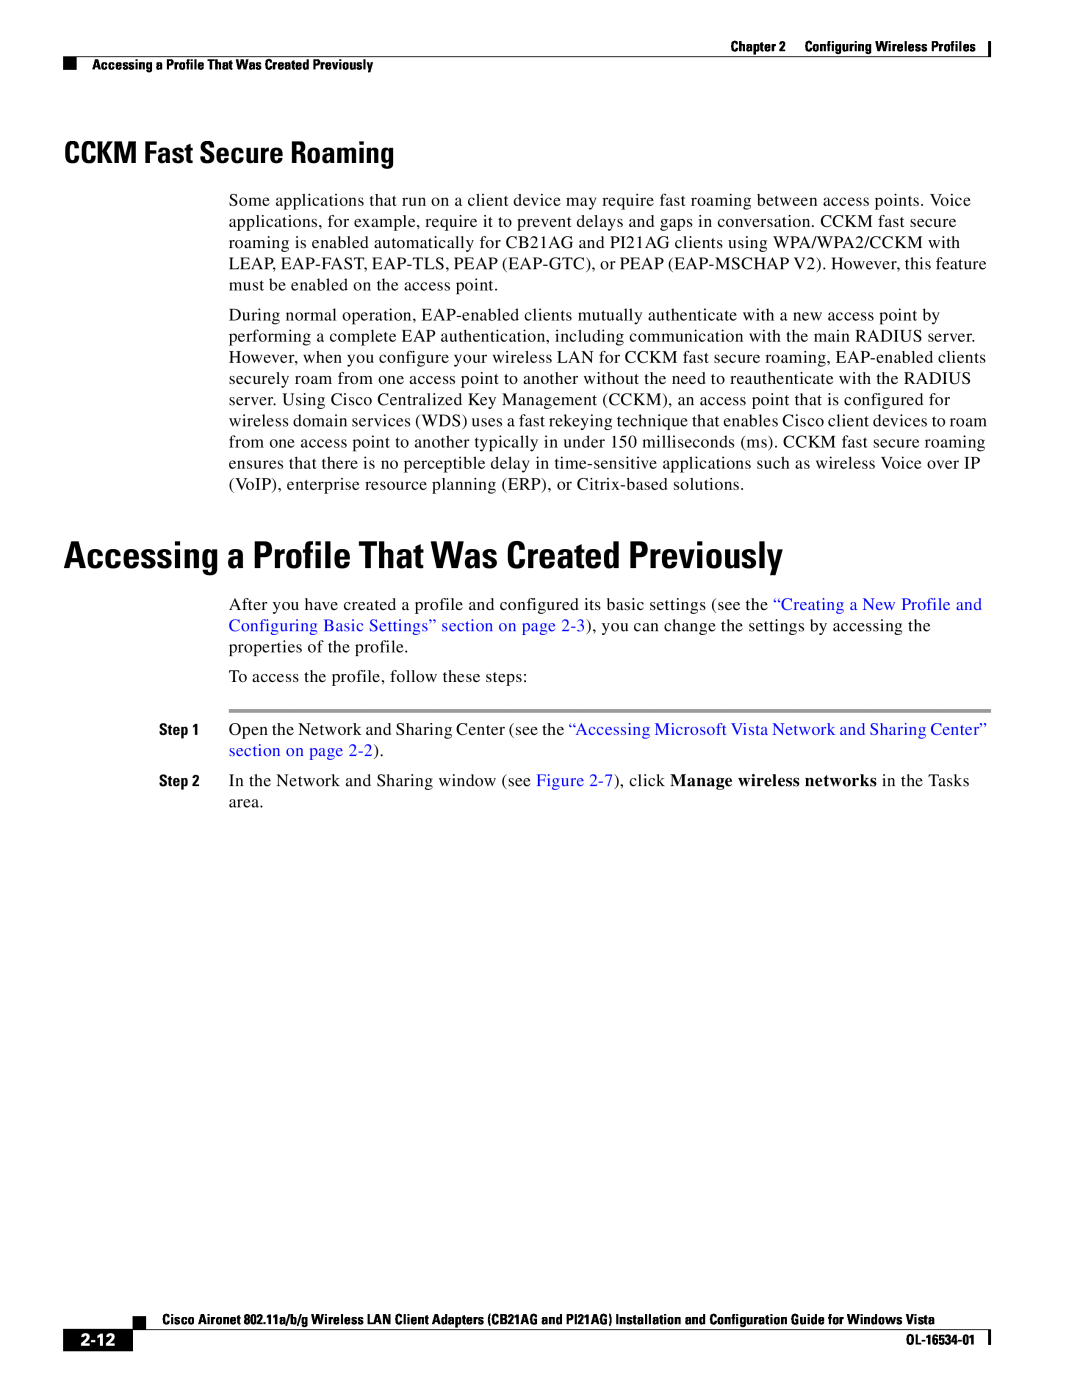 Cisco Systems PI21AG, CB21AG manual Accessing a Profile That Was Created Previously, CCKM Fast Secure Roaming, 2-12 